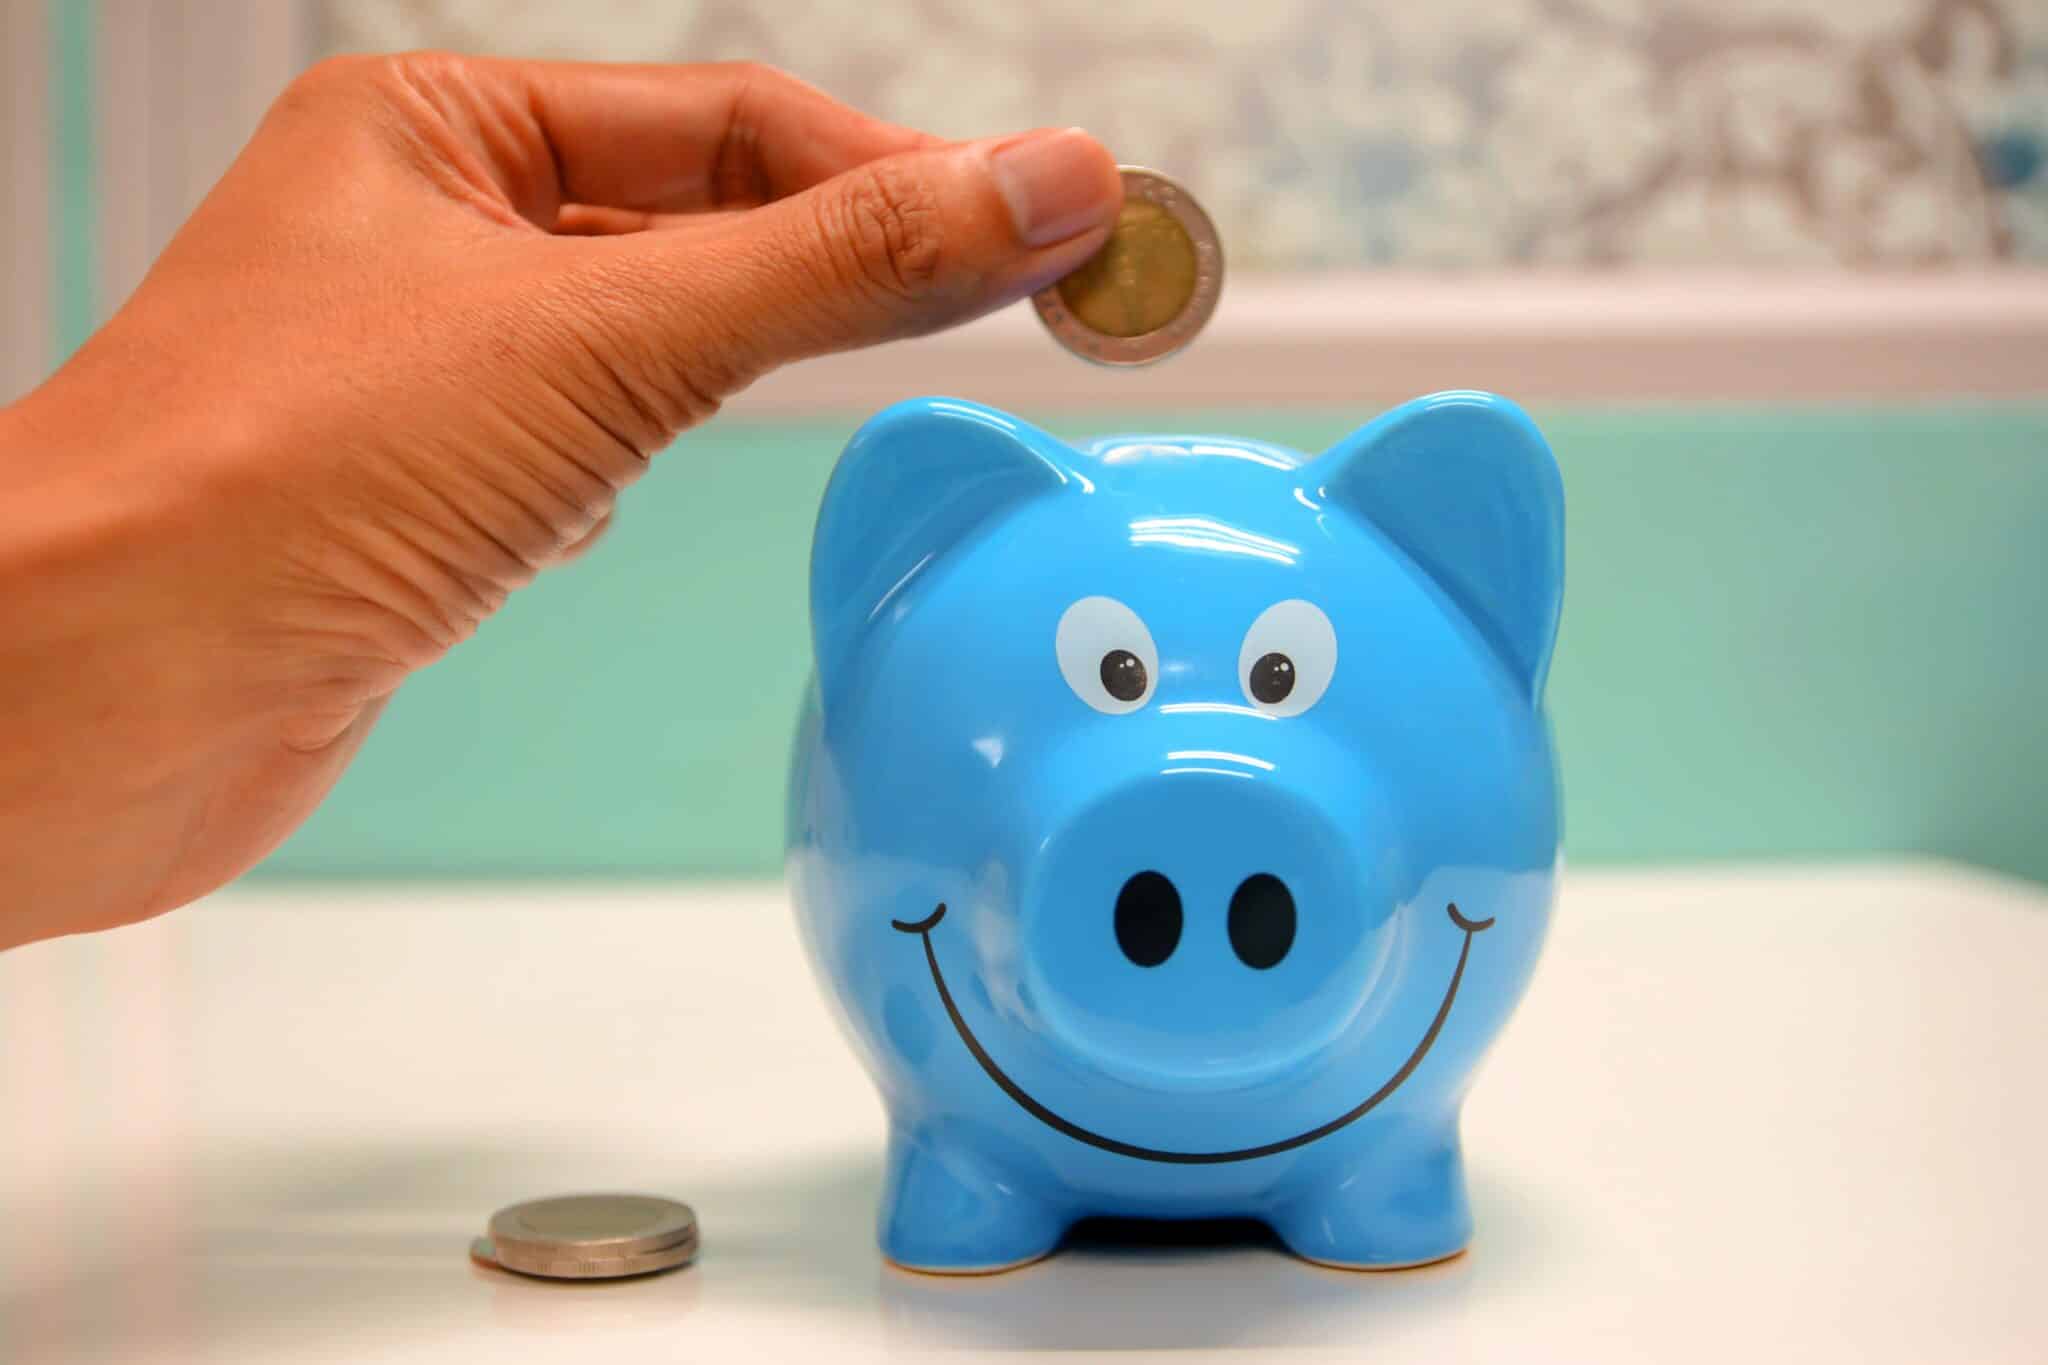 Ilustrasi Menabung/Photo by maitree rimthong: https://www.pexels.com/photo/person-putting-coin-in-a-piggy-bank-1602726/